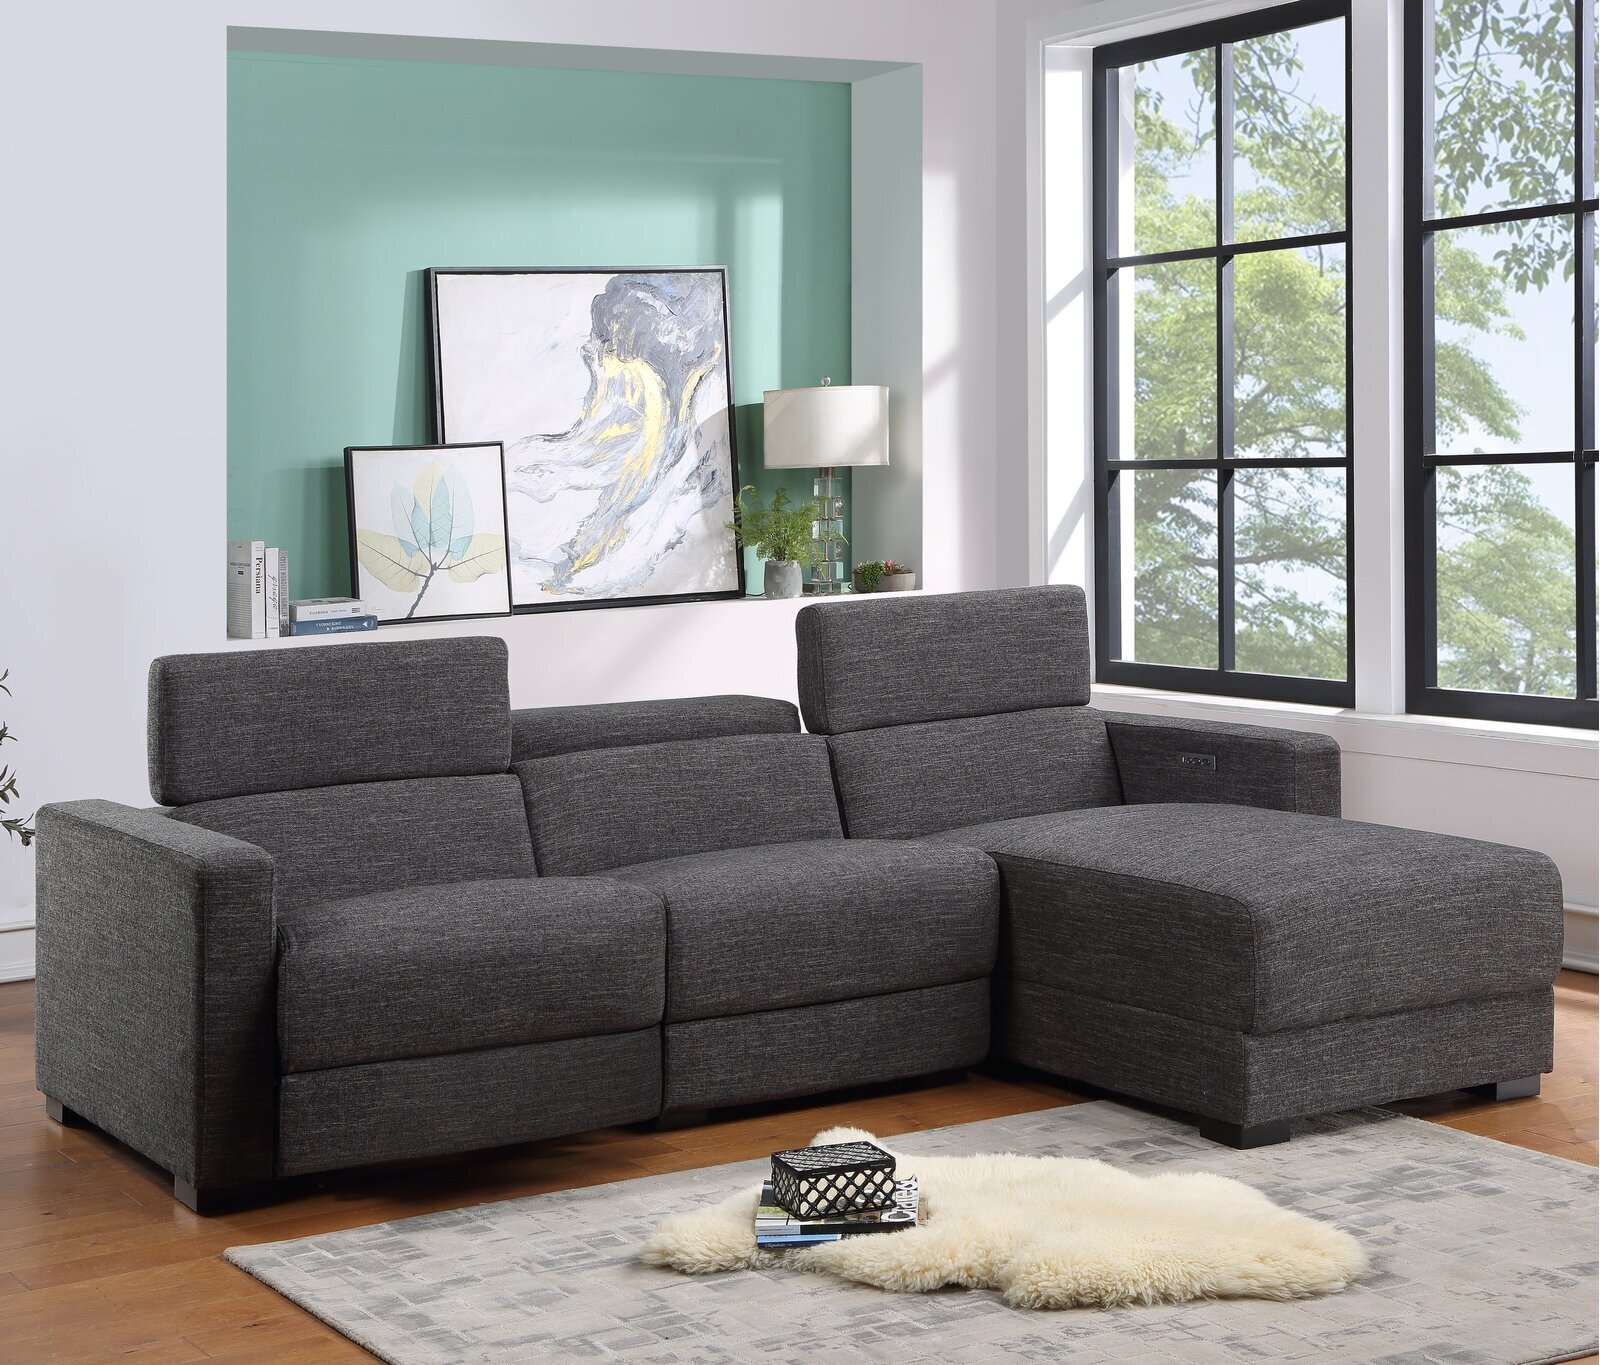 Contemporary, Stylish Reclining Sectional with Chaise